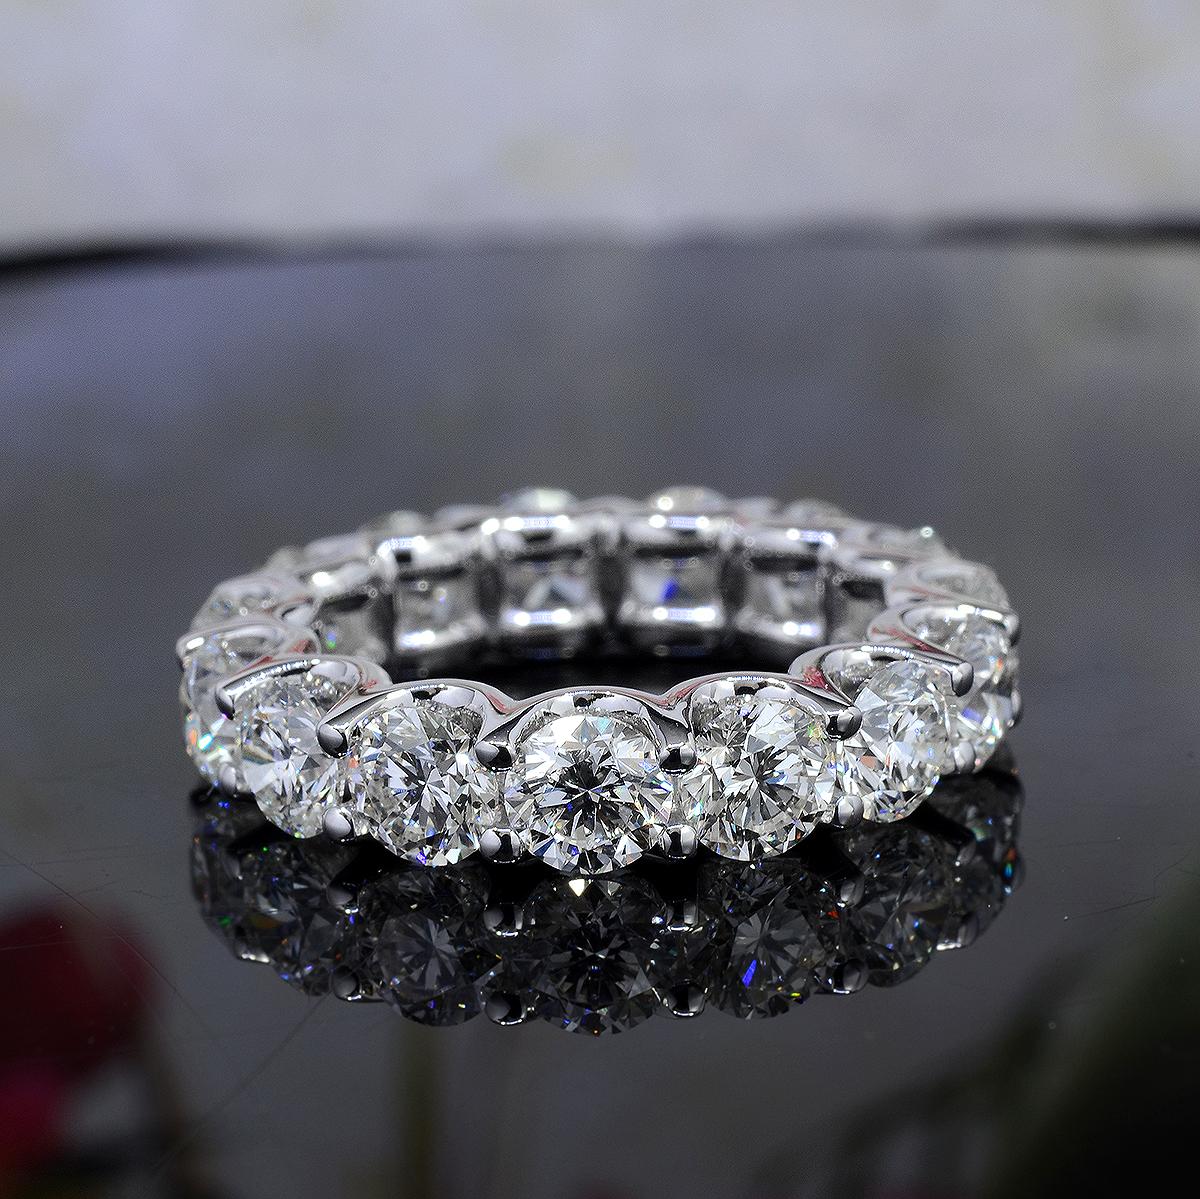 This gorgeous 6 Carat round brilliant cut eternity ring is full of luster and will guarantee to make her happy. It has a color grade of G and a clarity grade of SI1 which is very clean and shows no inclusions to the naked eye. The size of each